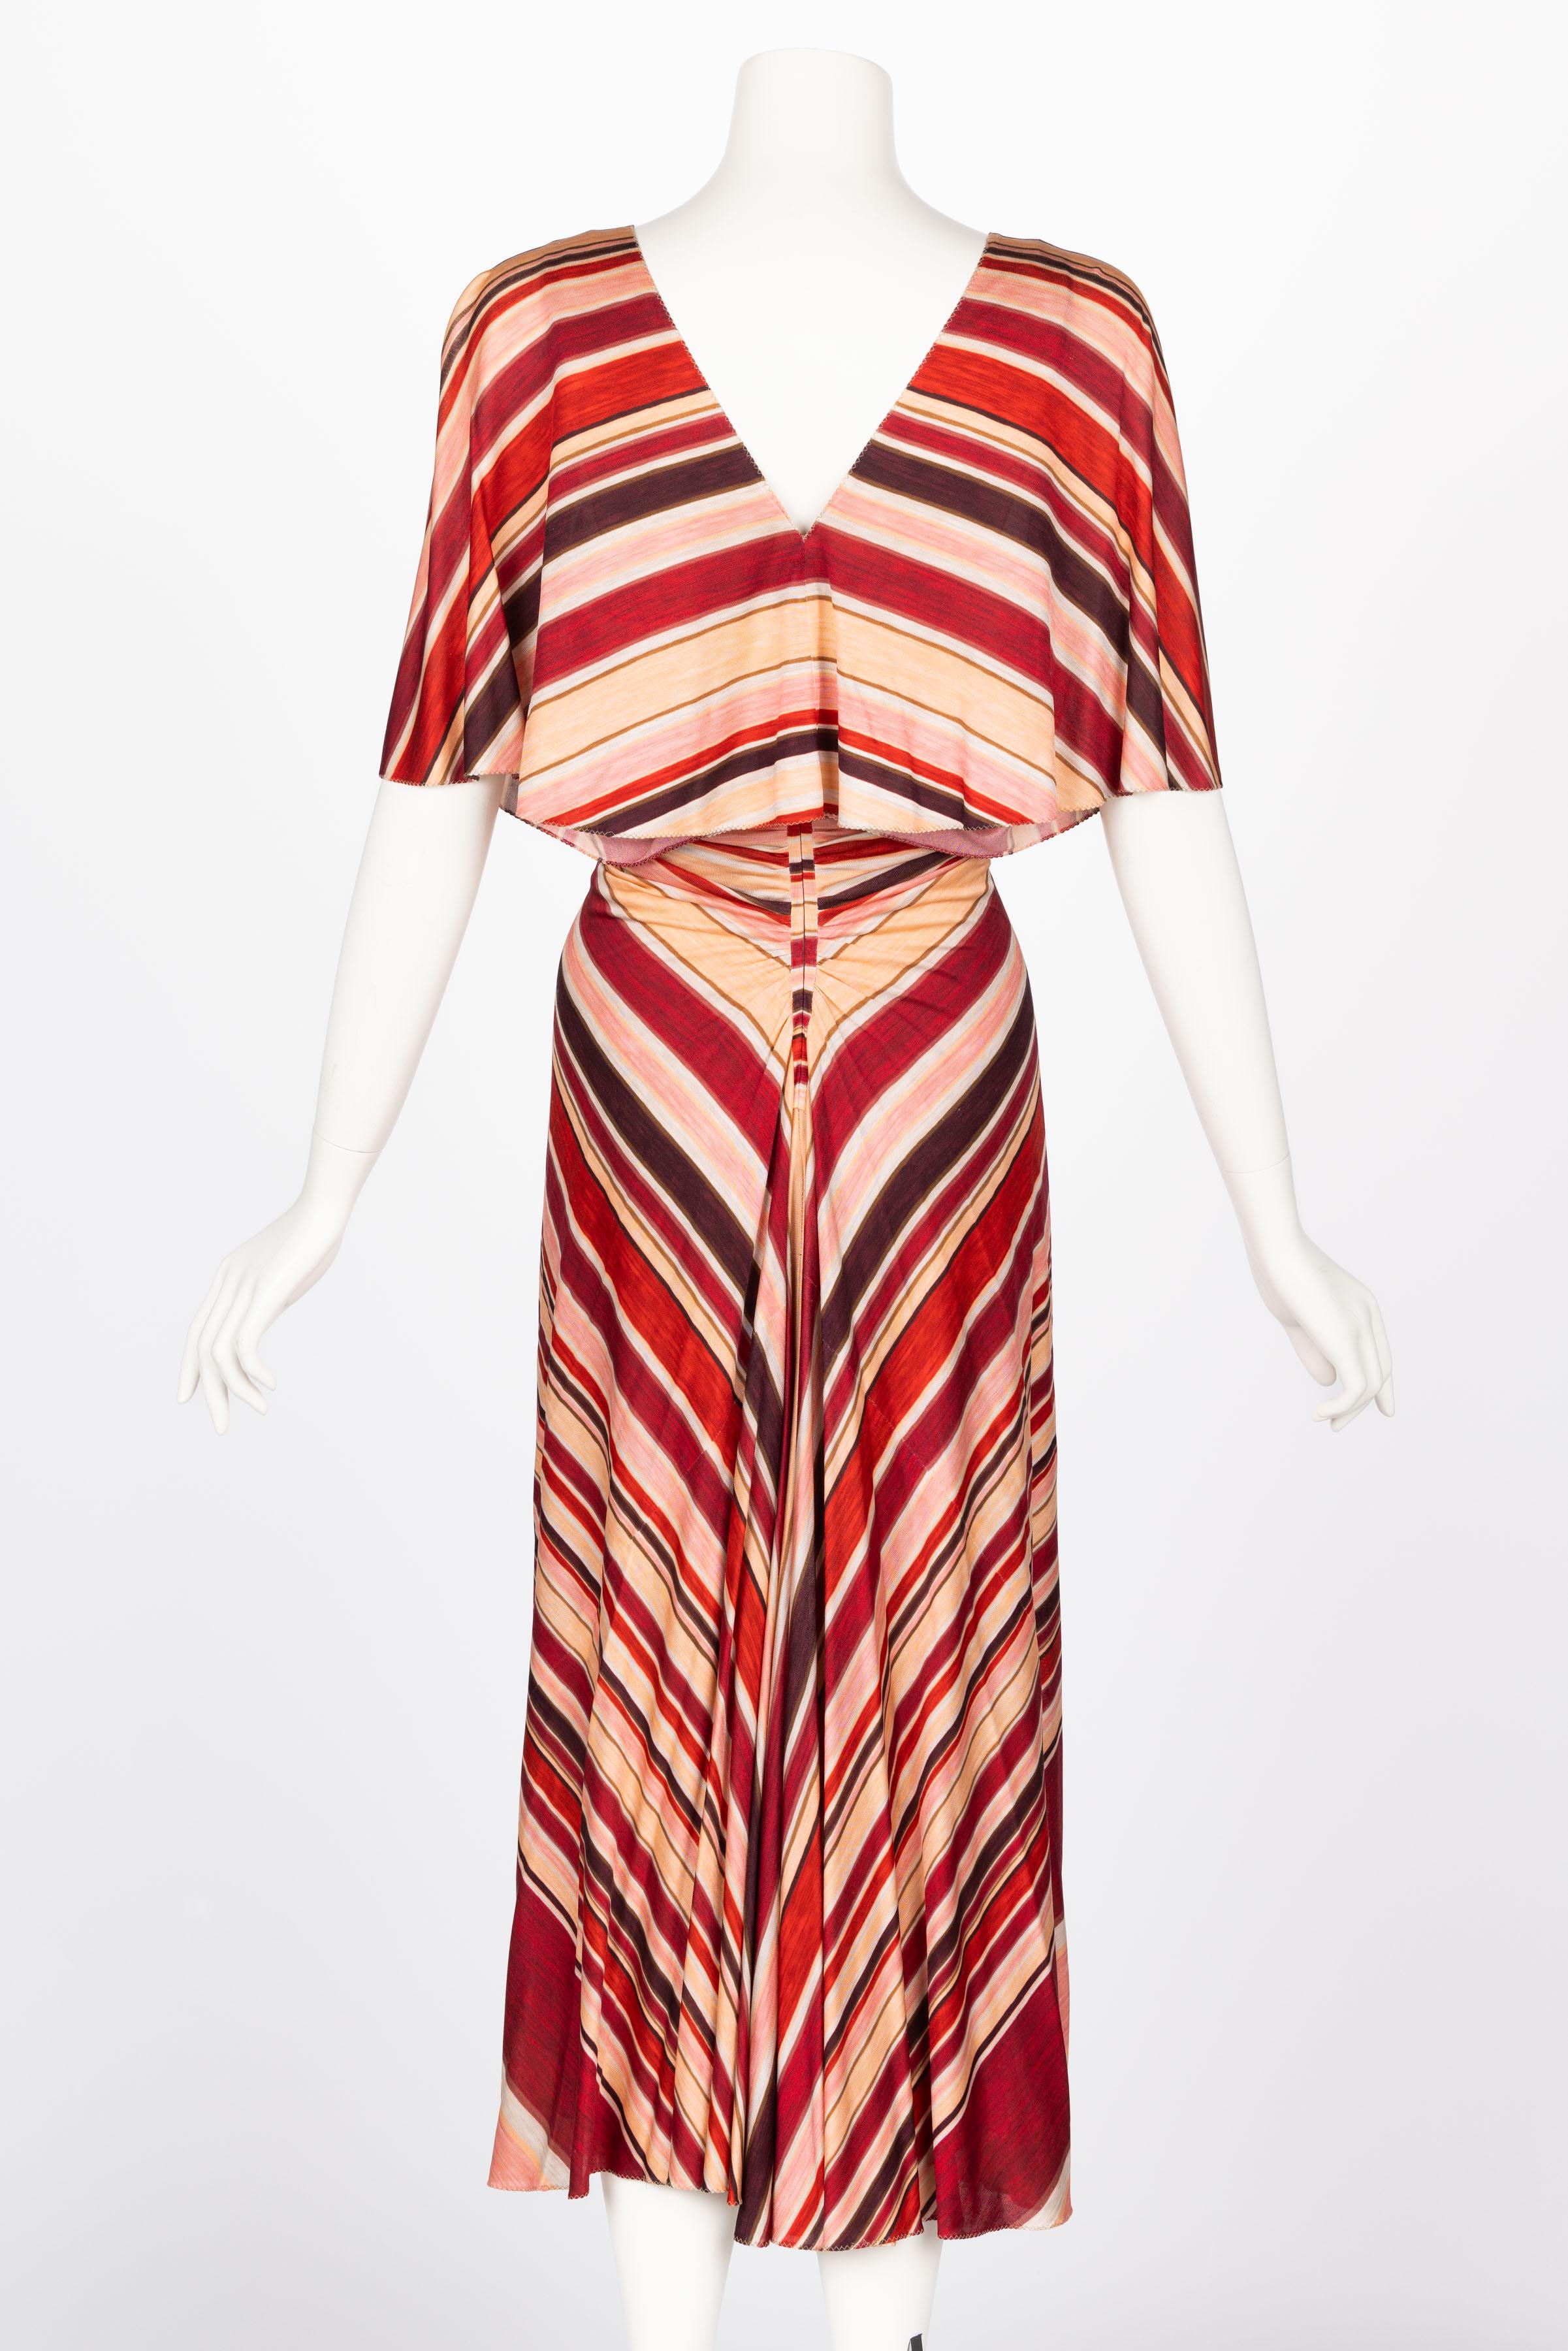 Marc Jacobs Spring 2011 Red & Pink Striped Silk Dress For Sale 3